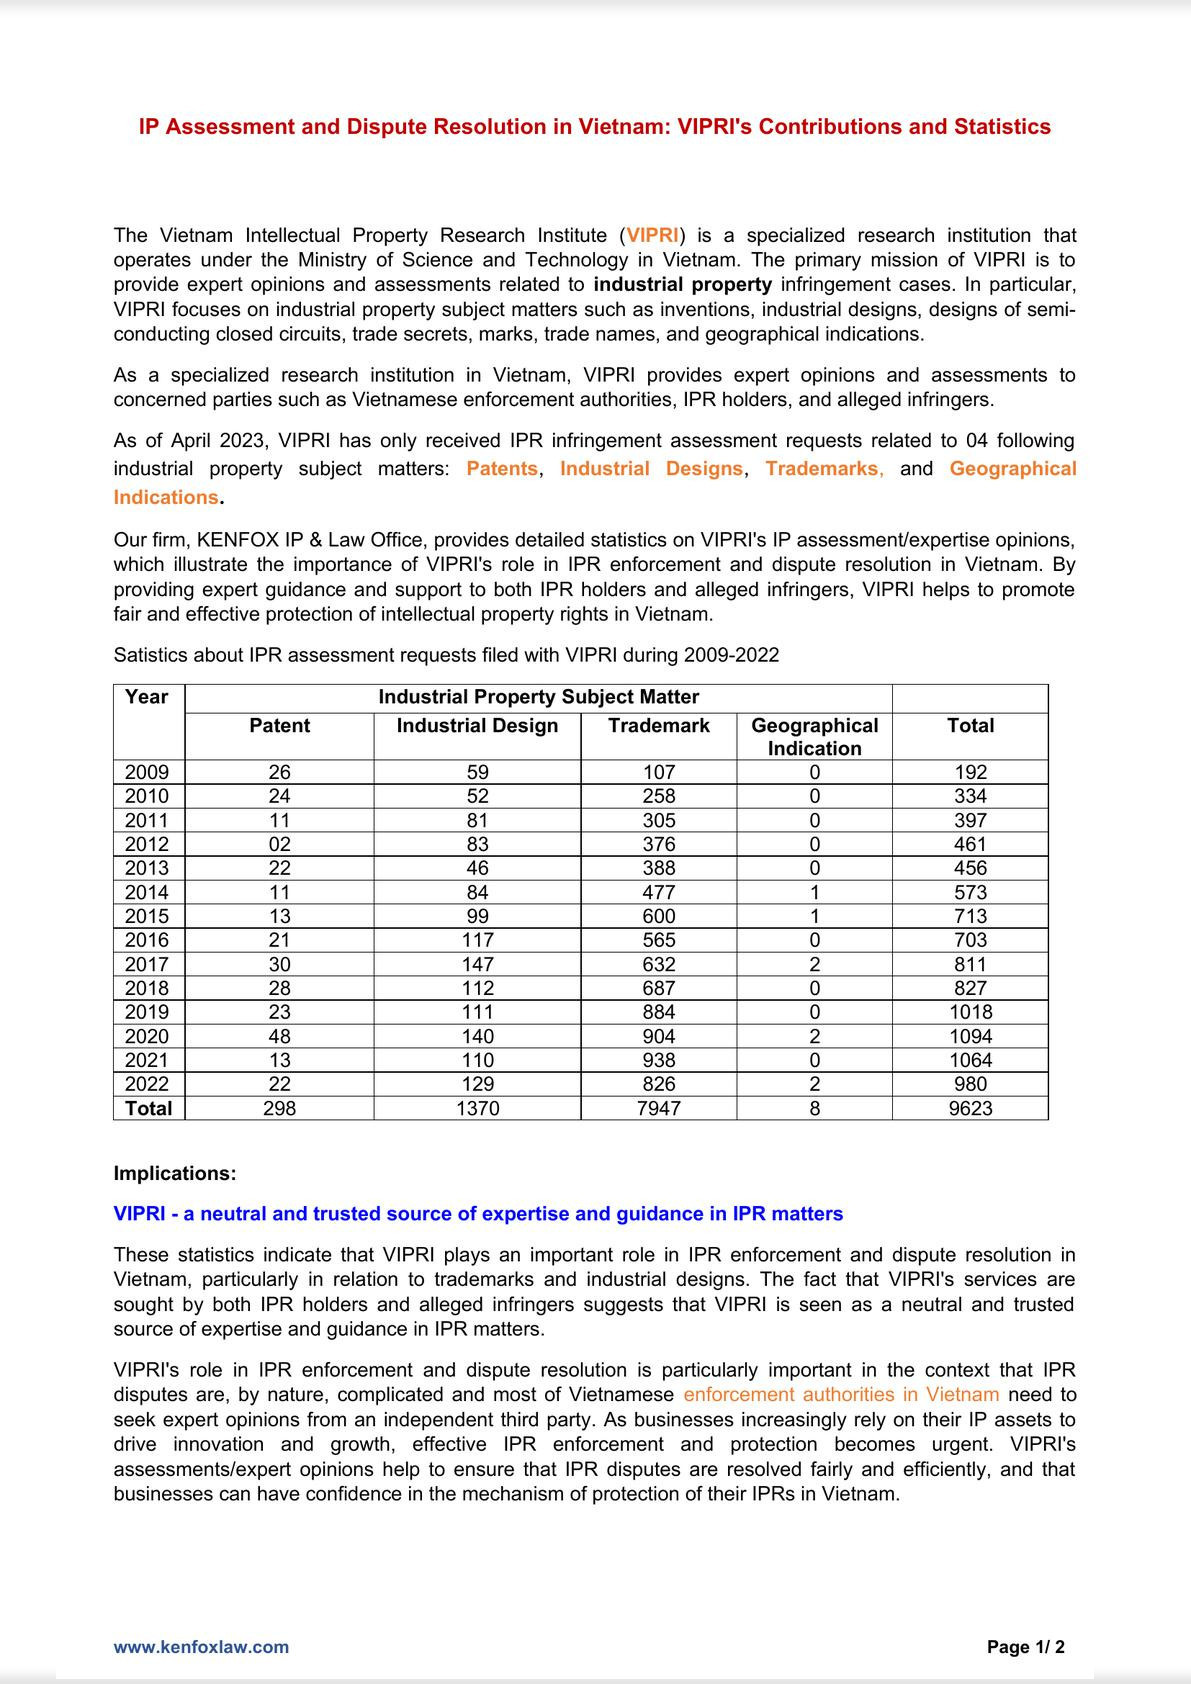  IP Assessment and Dispute Resolution in Vietnam: VIPRI's Contributions and Statistics-0